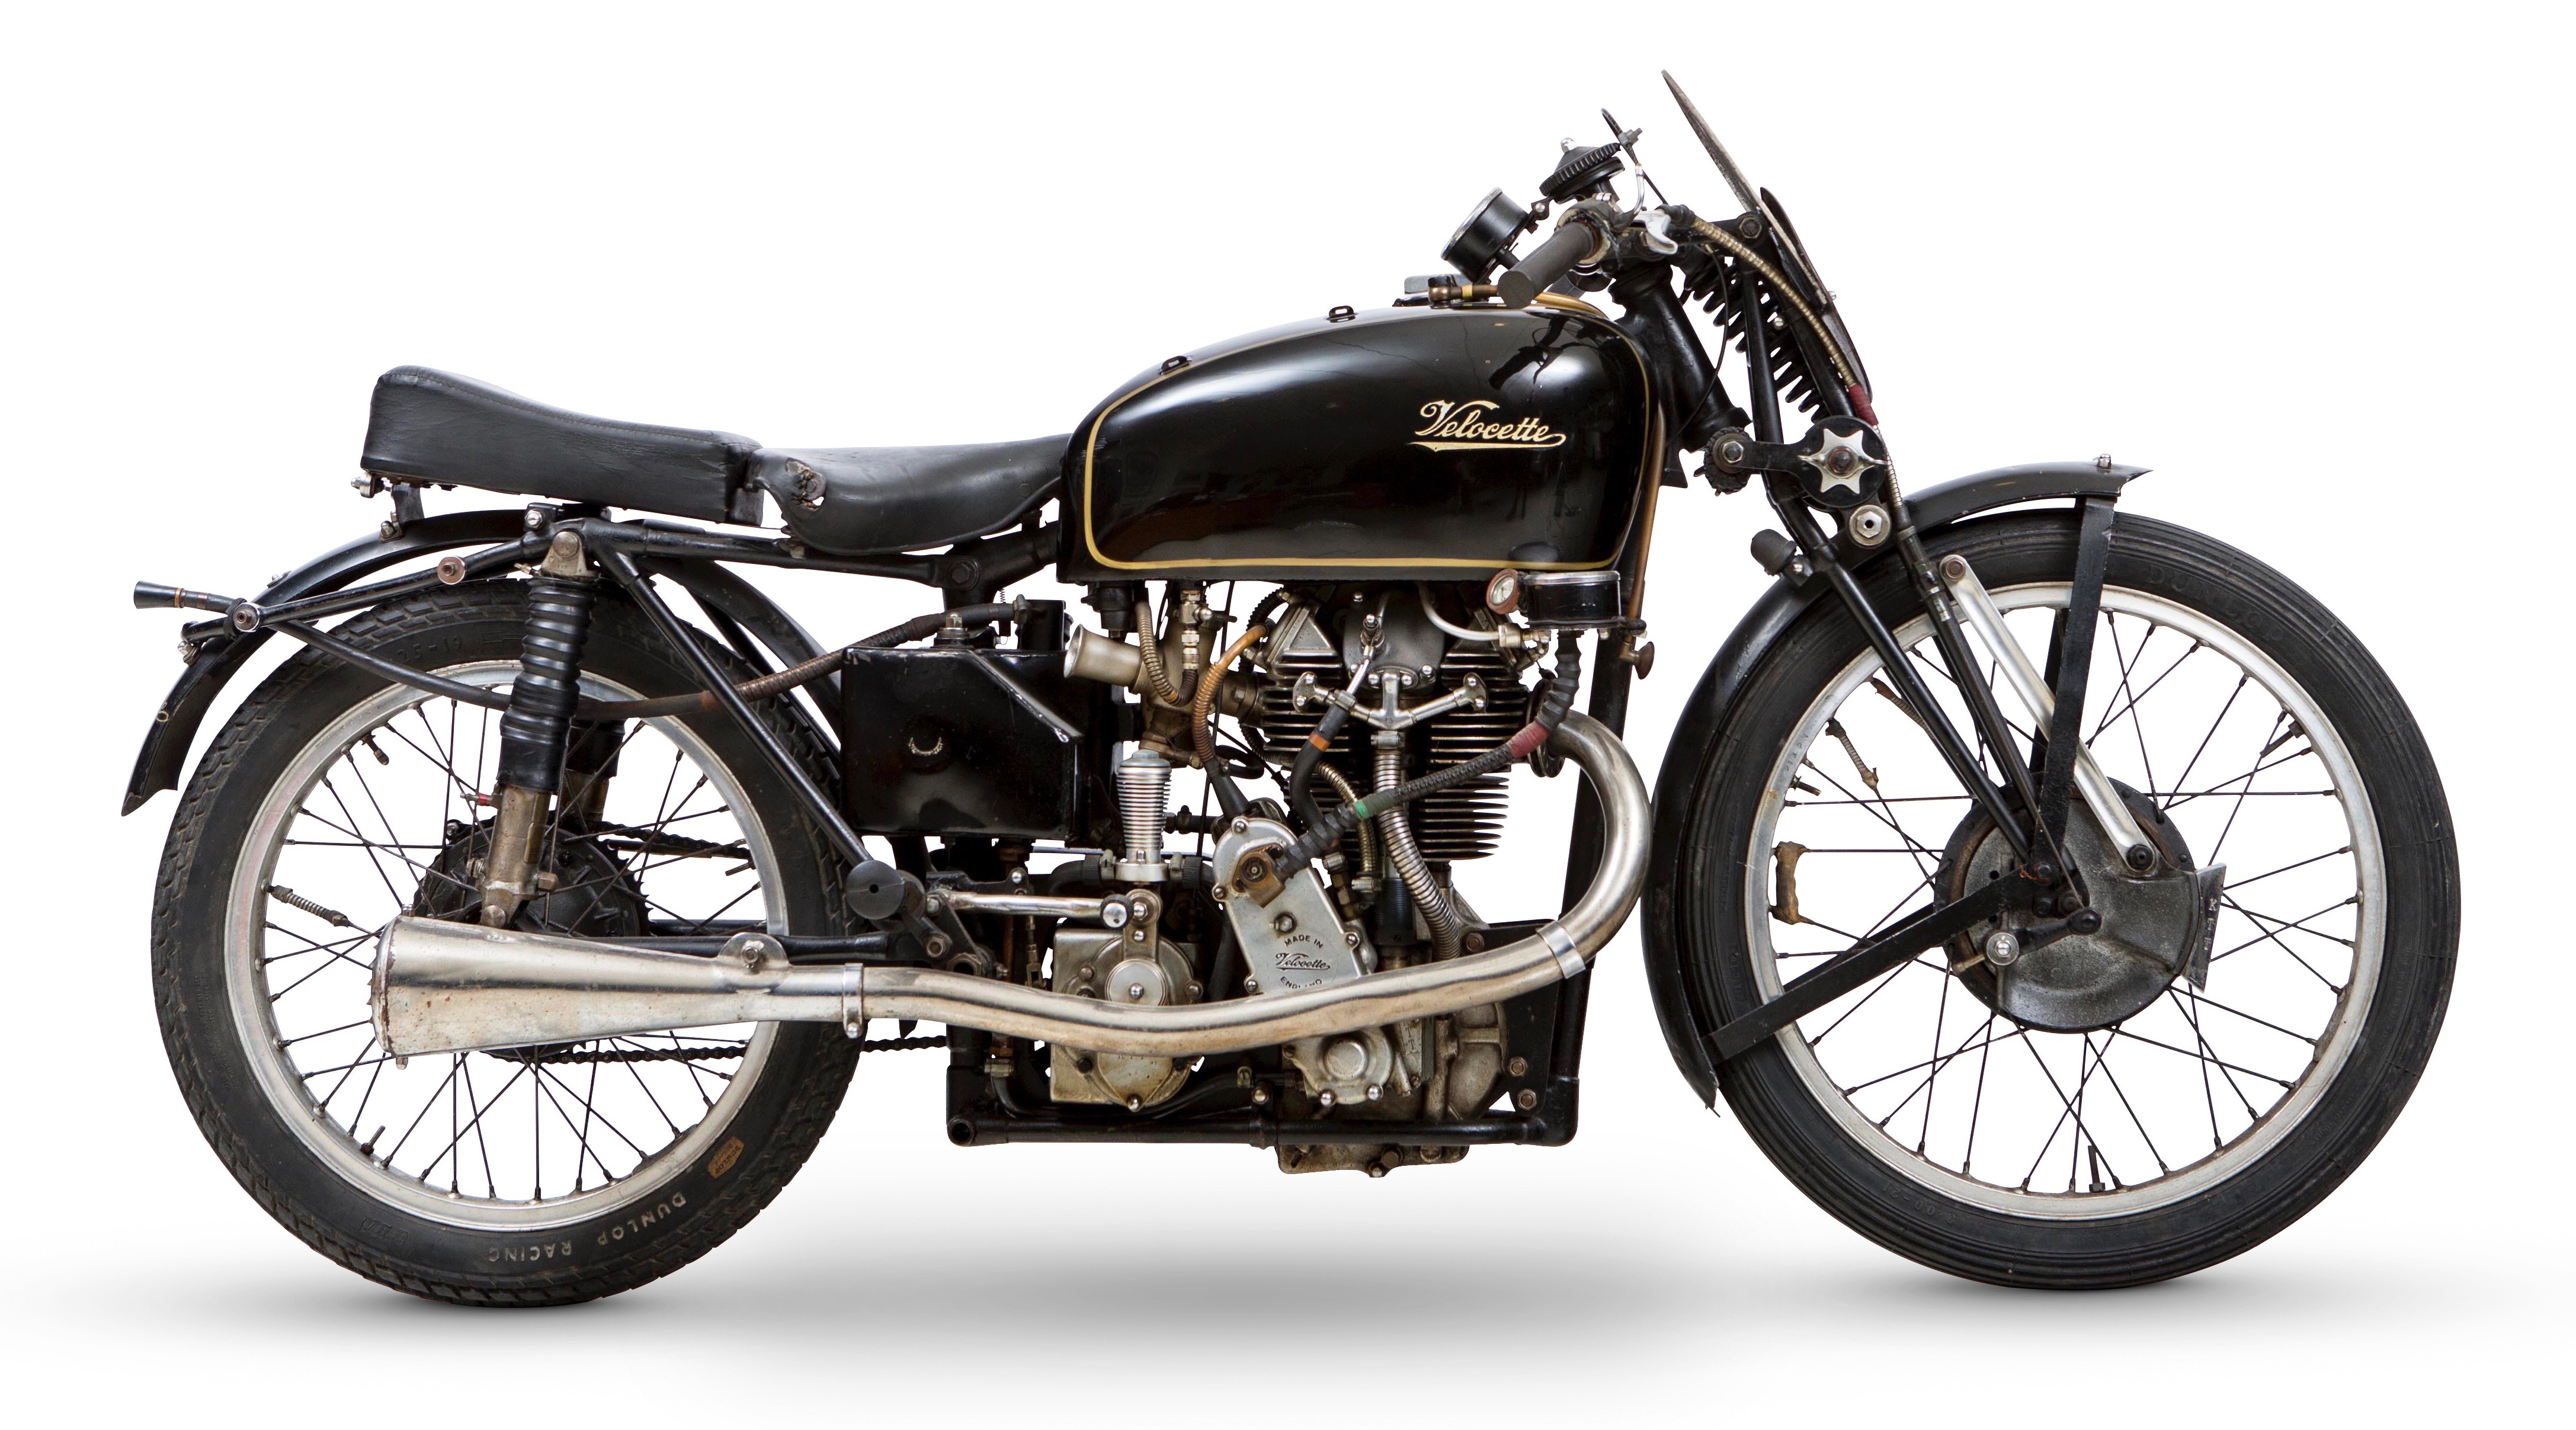 Motorcycles, ’70s bikes star in single-owner motorcycle auction, ClassicCars.com Journal